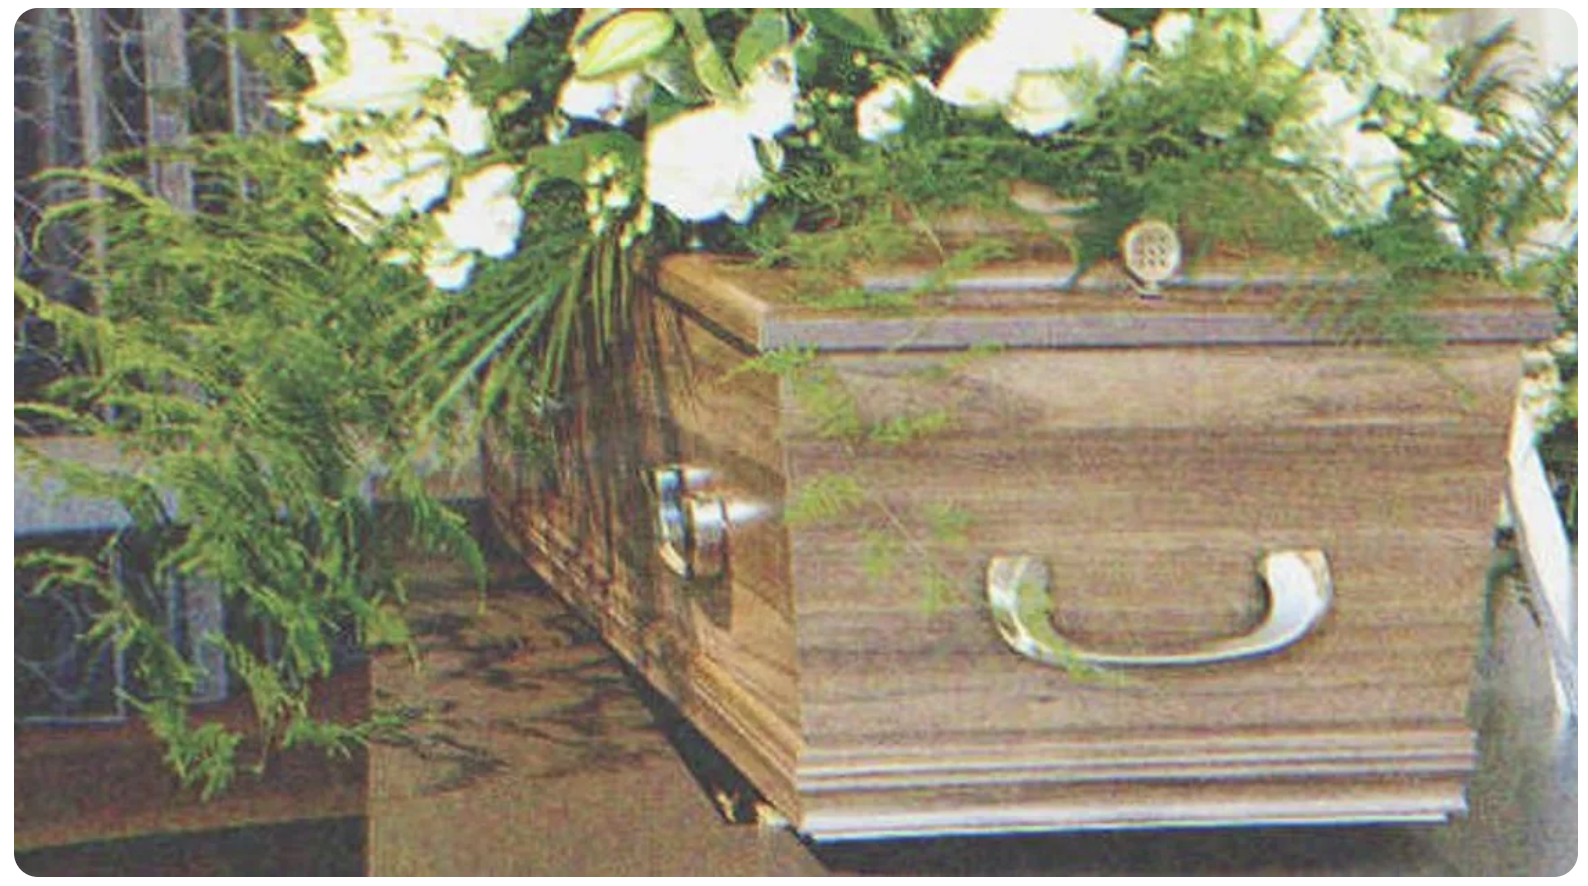 A coffin with flowers on it | Source: Shutterstock